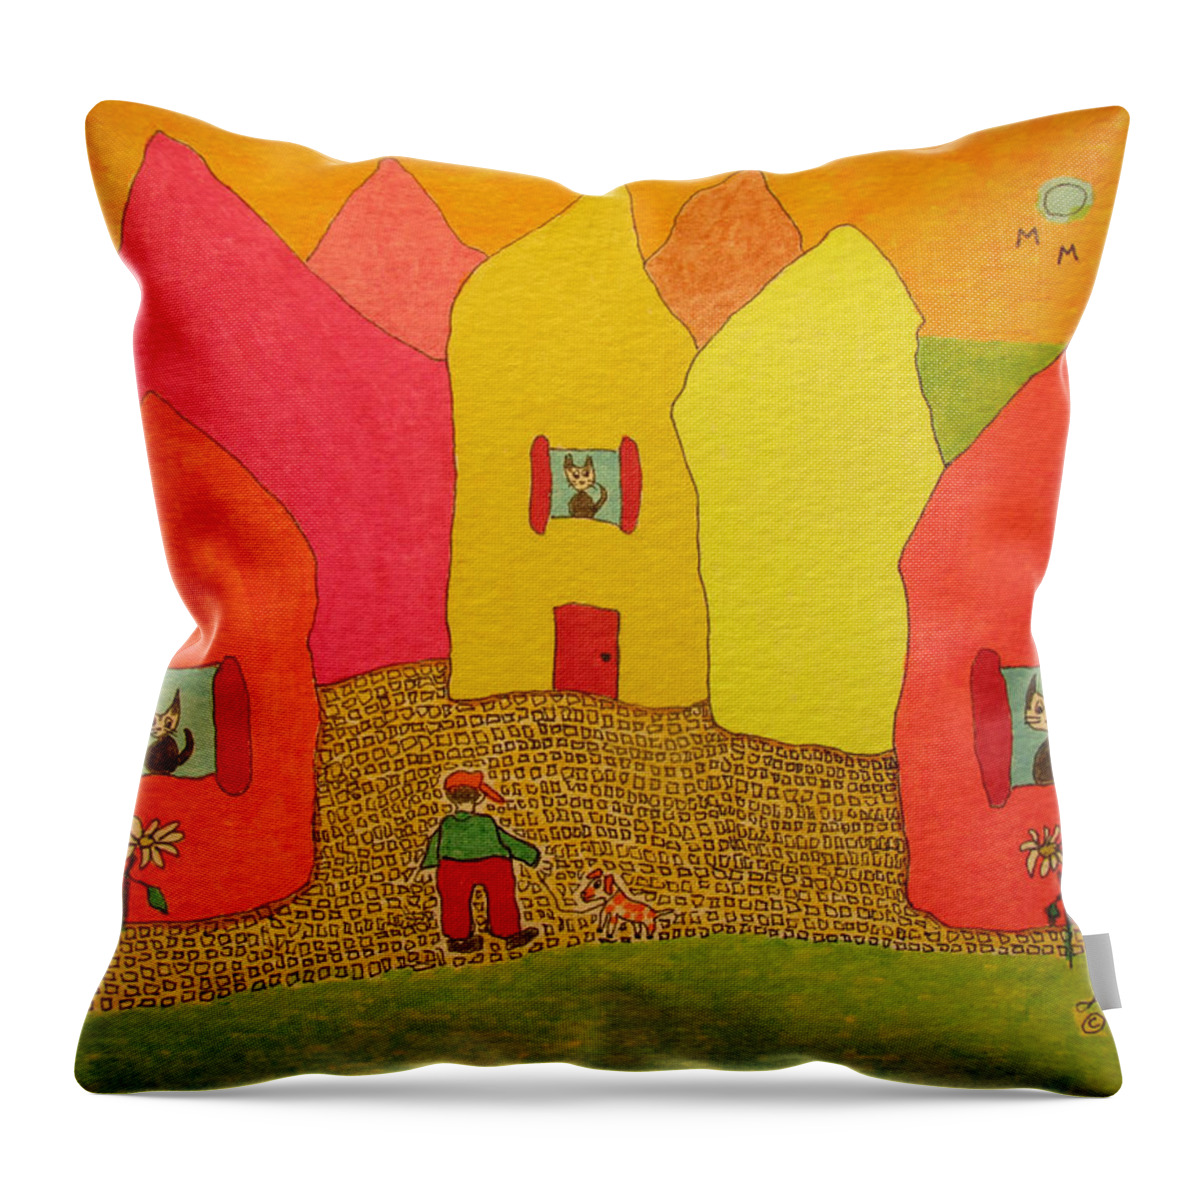 Hagood Throw Pillow featuring the painting Cone-shaped Houses Man With Dog by Lew Hagood